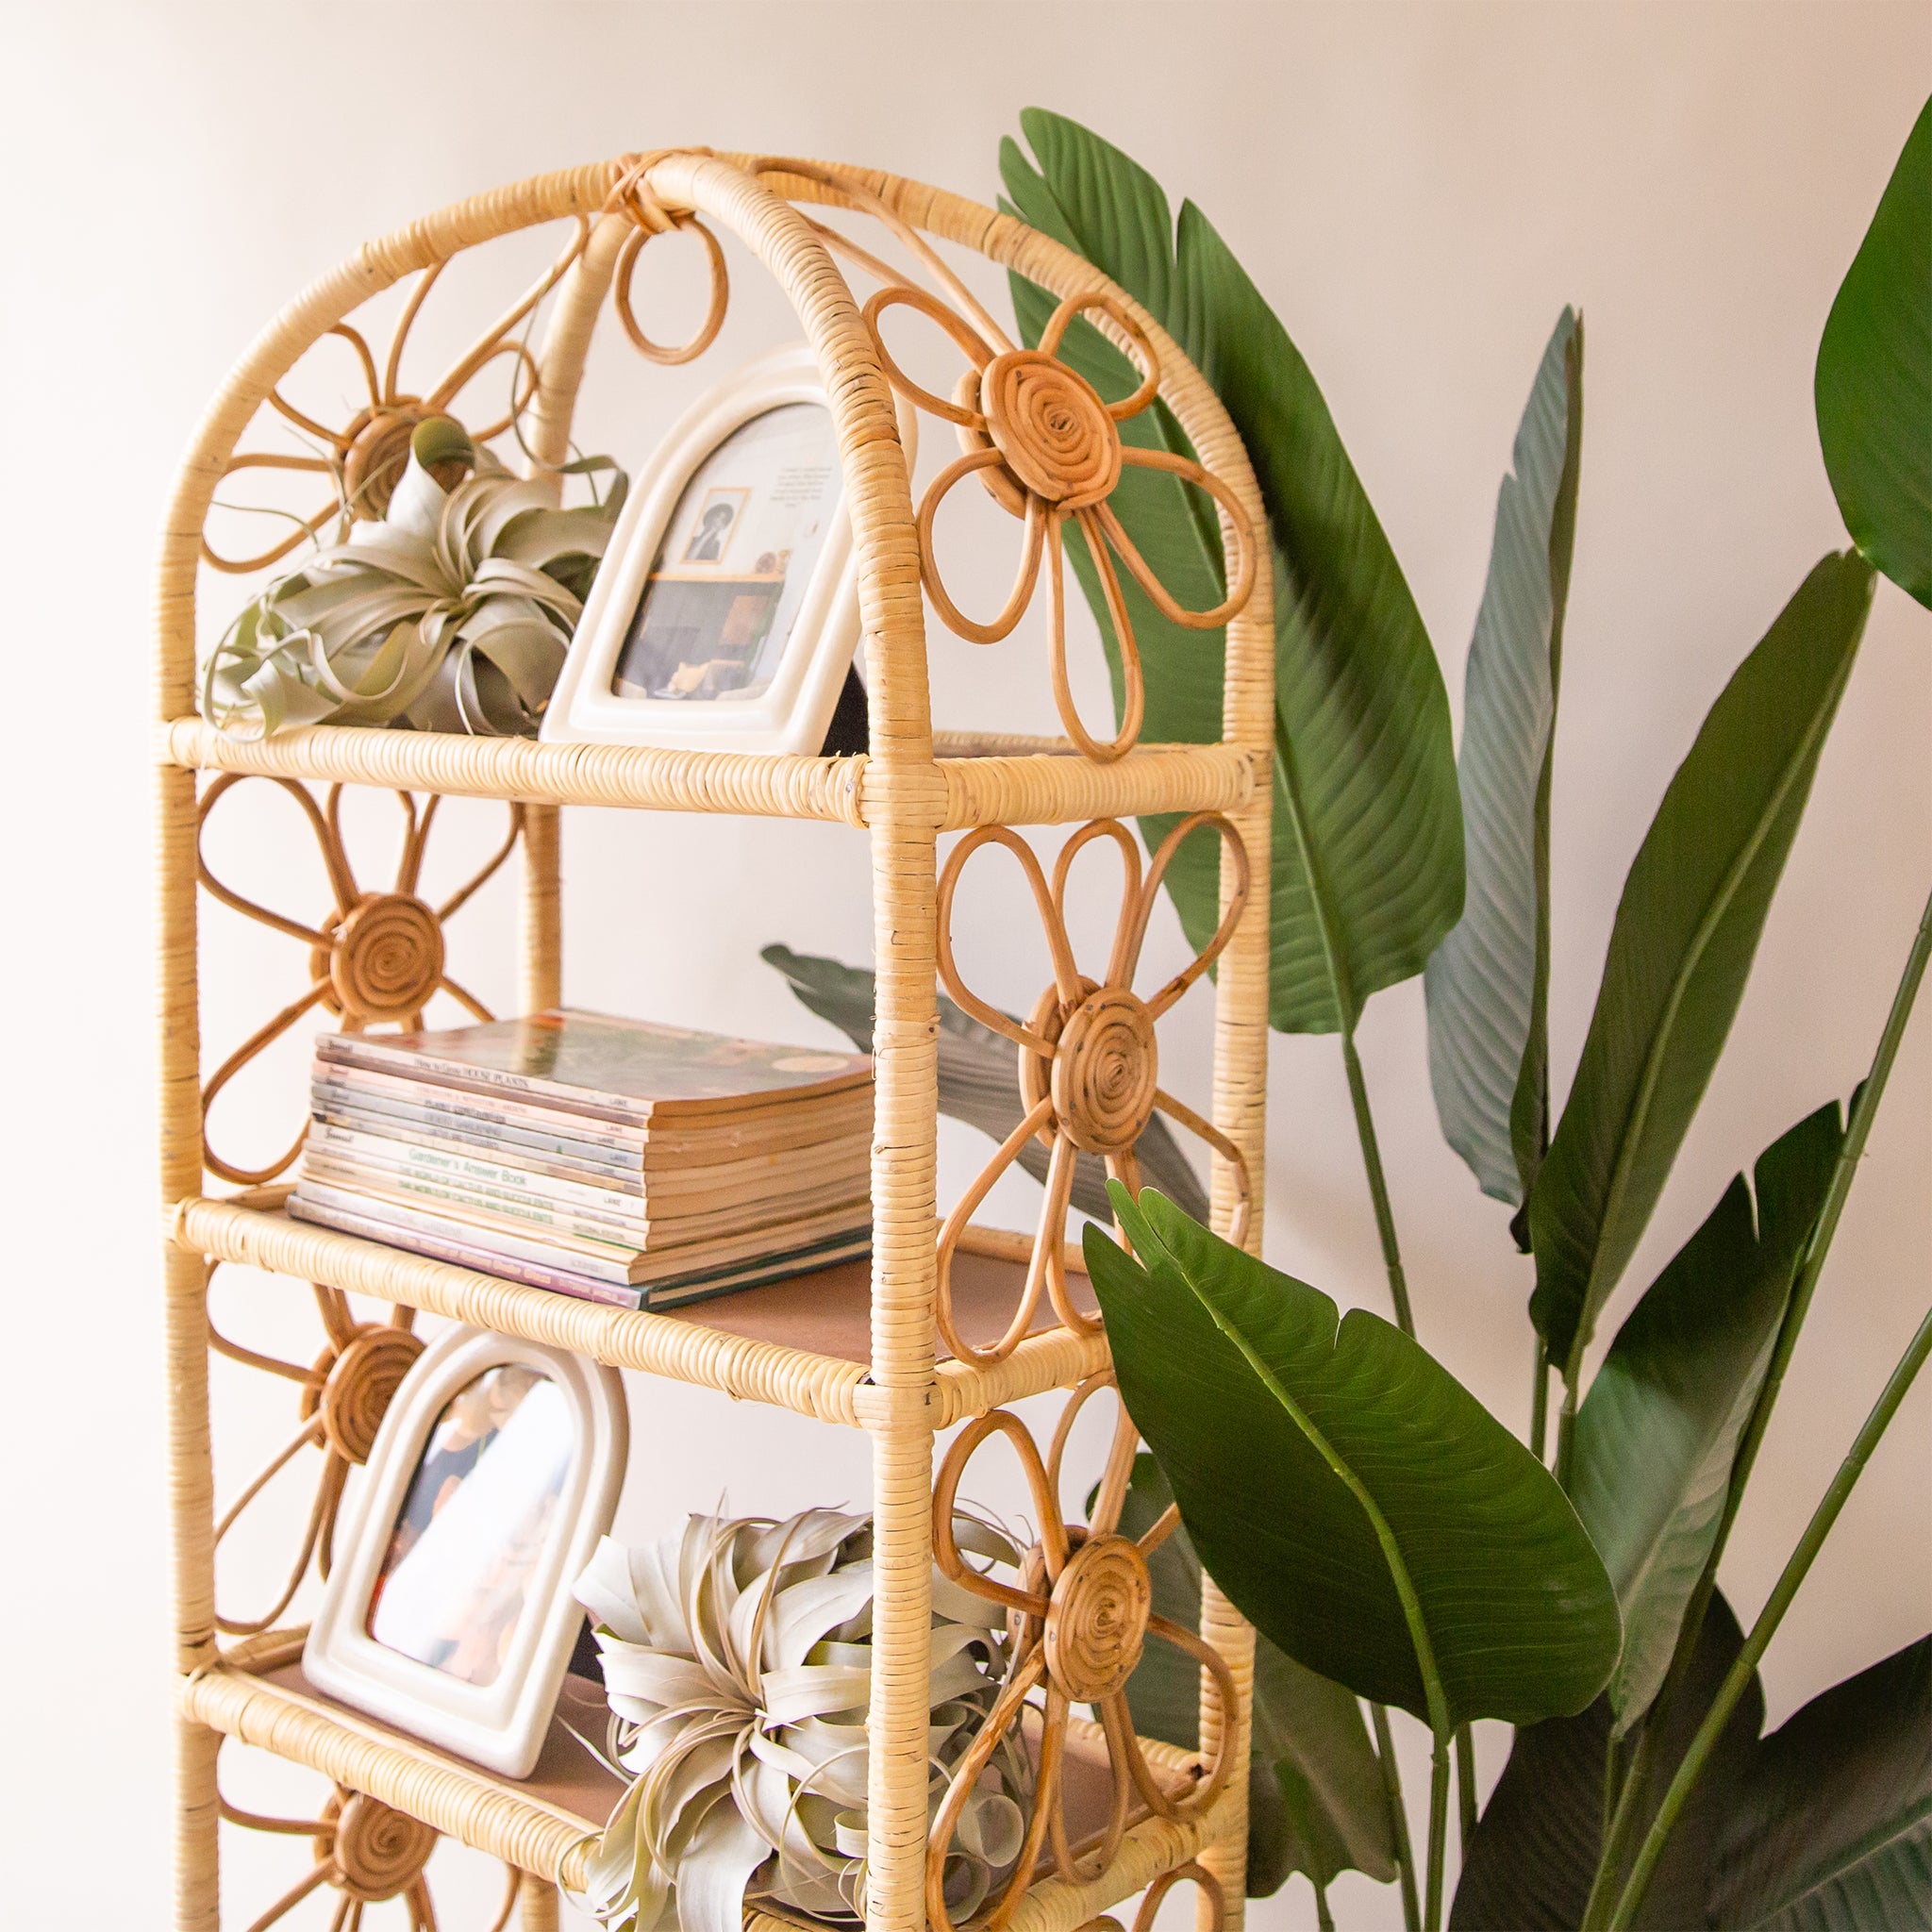 The large version of the shelf. Natural woven rattan shelf with daisy accents on both sides. The sides are open and let in ample light to keep the shelves well lit. Each shelf is covered in rattan and has a chocolate brown bottom.